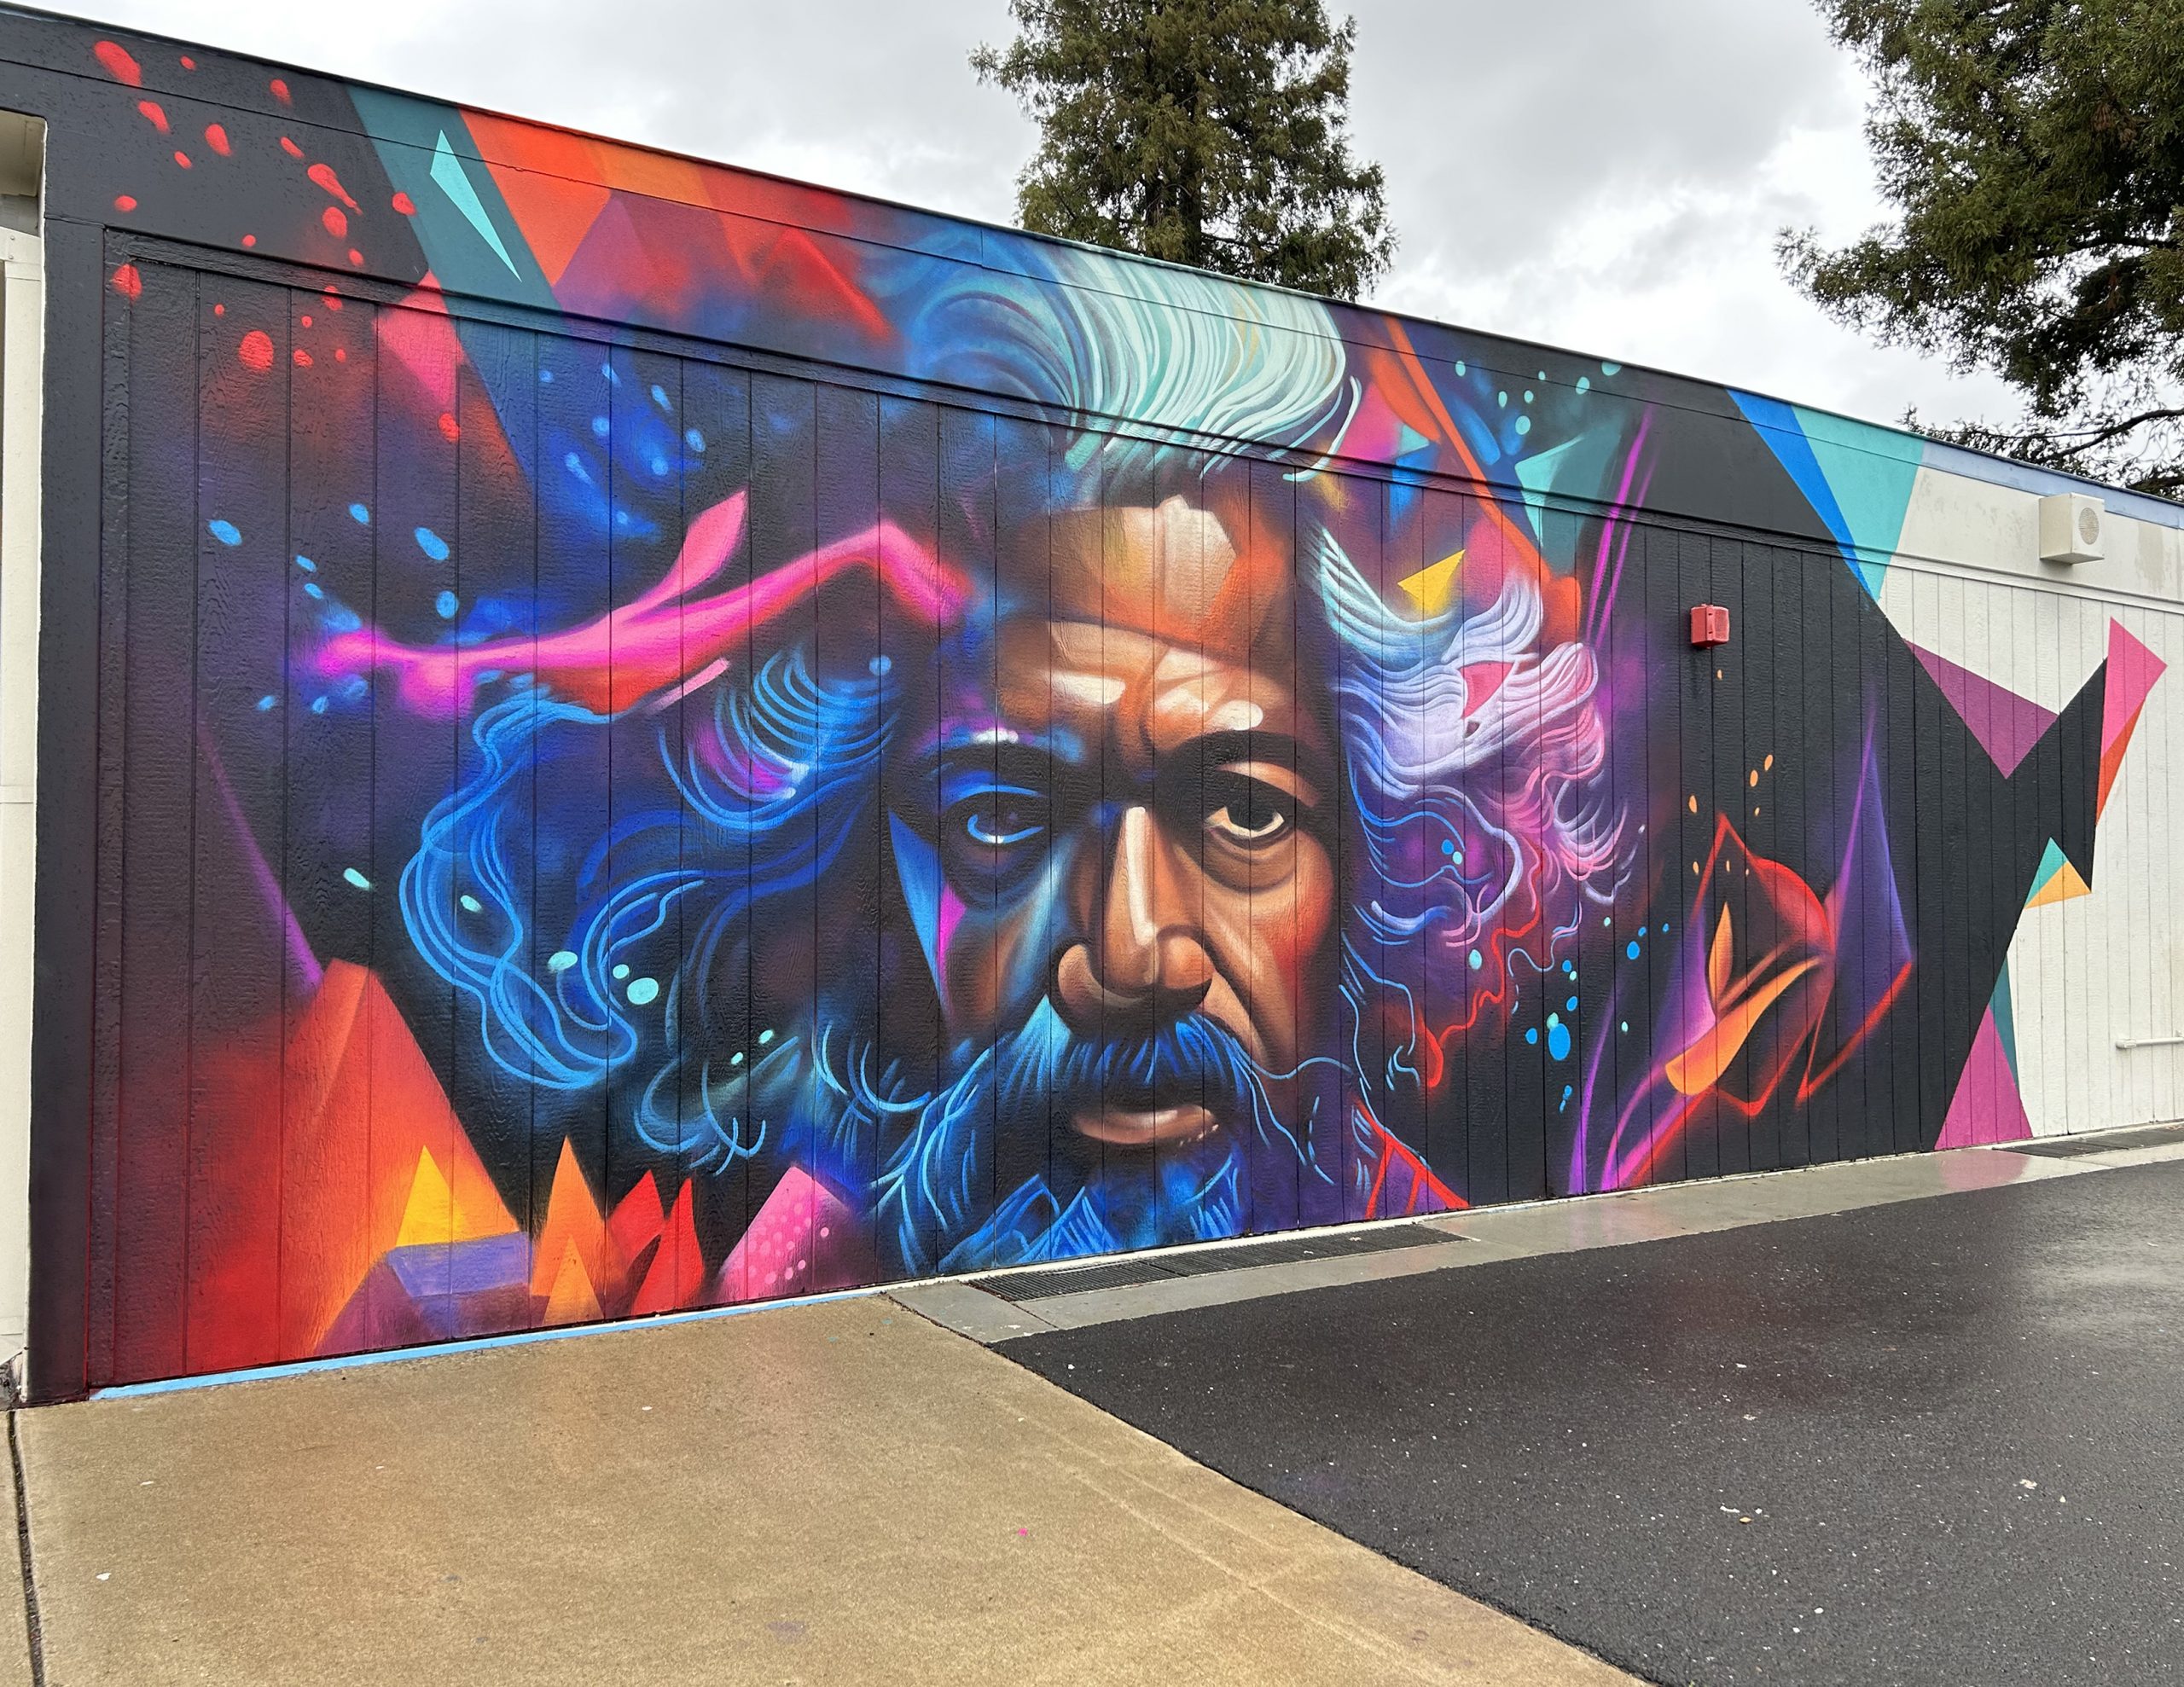 A Tribute to Frederick Douglass at John Cabrillo Elementary